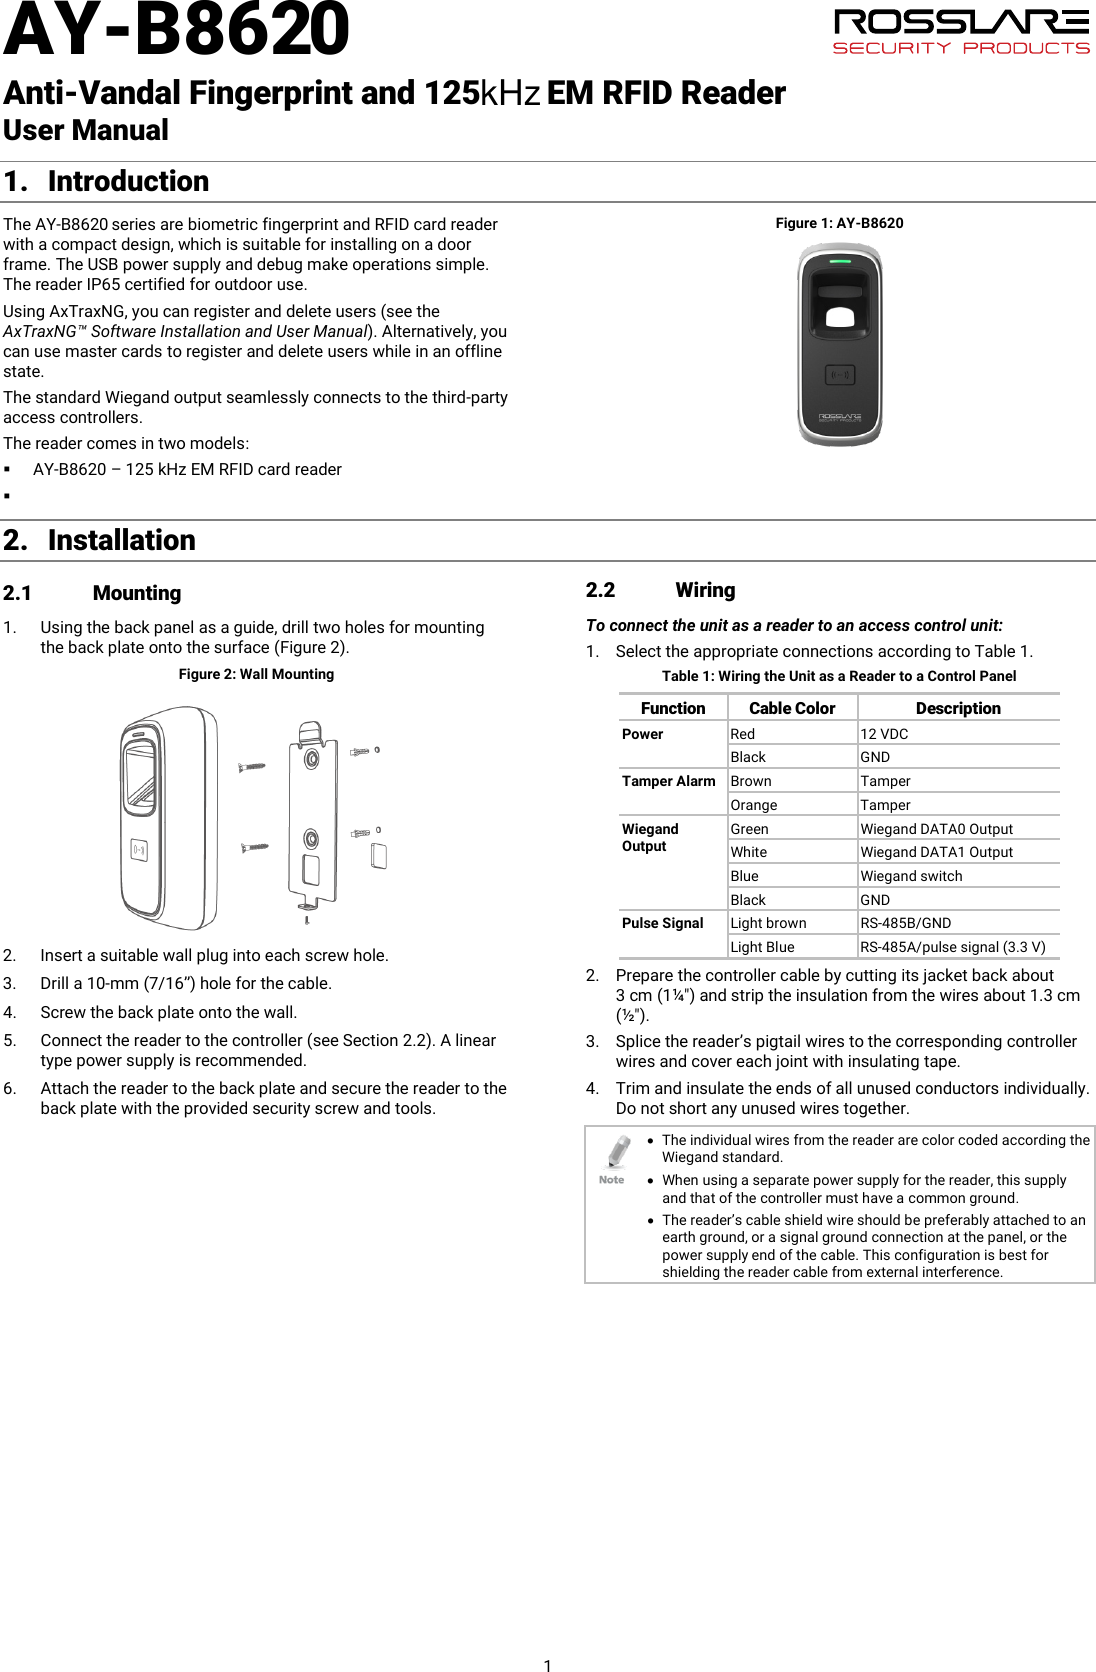 AY-B8620   Anti-Vandal Fingerprint and 125        EM RFID Reader  User Manual 1 1. Introduction The AY-B8620 series are biometric fingerprint and RFID card reader with a compact design, which is suitable for installing on a door frame. The USB power supply and debug make operations simple. The reader IP65 certified for outdoor use. Using AxTraxNG, you can register and delete users (see the AxTraxNG™ Software Installation and User Manual). Alternatively, you can use master cards to register and delete users while in an offline state. The standard Wiegand output seamlessly connects to the third-party access controllers. The reader comes in two models:  AY-B8620 – 125 kHz EM RFID card reader  Figure 1: AY-B8620 2. Installation 2.1 Mounting 1. Using the back panel as a guide, drill two holes for mounting the back plate onto the surface (Figure 2). Figure 2: Wall Mounting  2. Insert a suitable wall plug into each screw hole. 3. Drill a 10-mm (7/16”) hole for the cable. 4. Screw the back plate onto the wall. 5. Connect the reader to the controller (see Section  2.2). A linear type power supply is recommended. 6. Attach the reader to the back plate and secure the reader to the back plate with the provided security screw and tools. 2.2 Wiring To connect the unit as a reader to an access control unit: 1. Select the appropriate connections according to Table 1. Table 1: Wiring the Unit as a Reader to a Control Panel Function Cable Color Description Power Red 12 VDC Black GND Tamper Alarm Brown Tamper Orange Tamper Wiegand Output Green Wiegand DATA0 Output White Wiegand DATA1 Output Blue Wiegand switch Black GND Pulse Signal Light brown RS-485B/GND Light Blue RS-485A/pulse signal (3.3 V) 2. Prepare the controller cable by cutting its jacket back about 3 cm (1¼&quot;) and strip the insulation from the wires about 1.3 cm (½&quot;). 3. Splice the reader’s pigtail wires to the corresponding controller wires and cover each joint with insulating tape. 4. Trim and insulate the ends of all unused conductors individually. Do not short any unused wires together.  • The individual wires from the reader are color coded according the Wiegand standard. • When using a separate power supply for the reader, this supply and that of the controller must have a common ground. • The reader’s cable shield wire should be preferably attached to an earth ground, or a signal ground connection at the panel, or the power supply end of the cable. This configuration is best for shielding the reader cable from external interference.  kHz